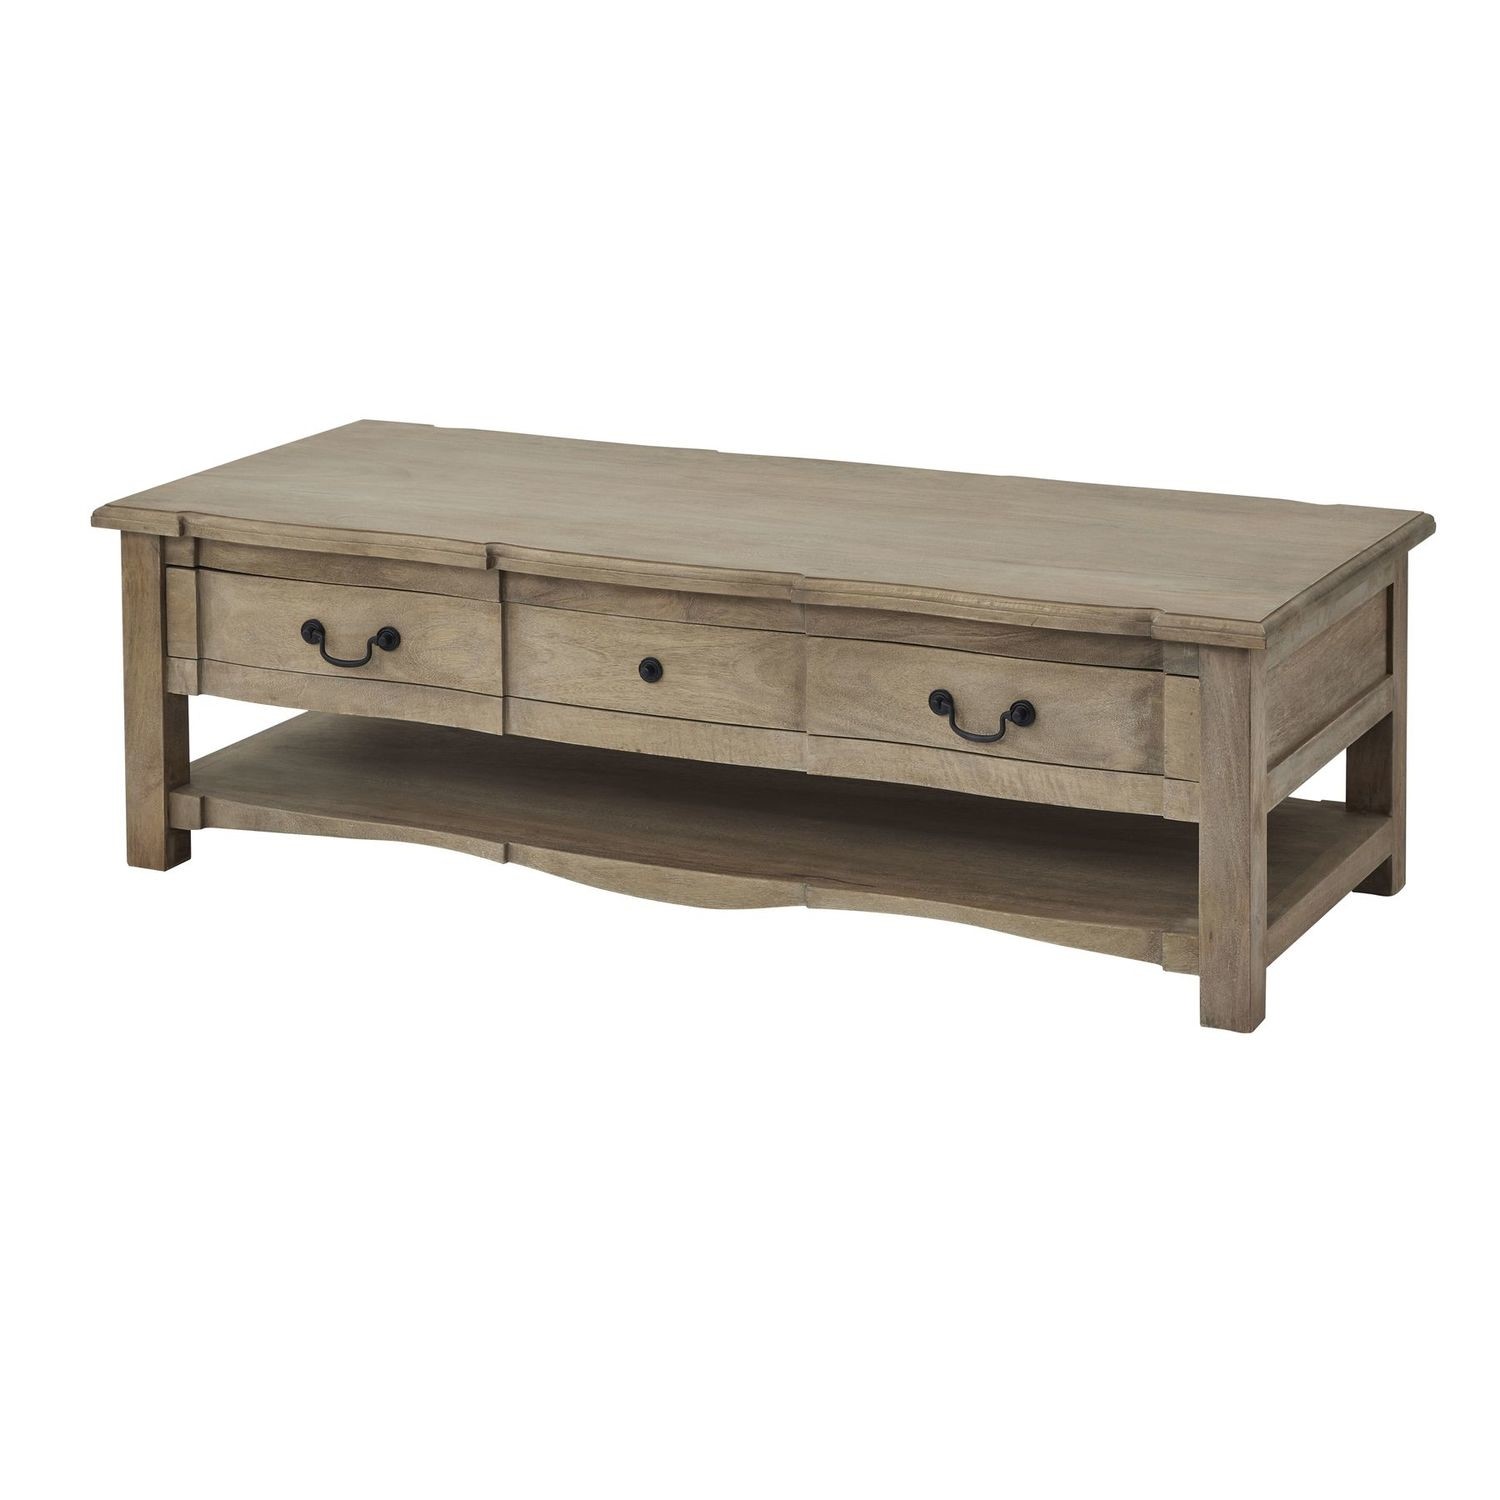 Read more about Copgrove collection 2 drawer coffee table